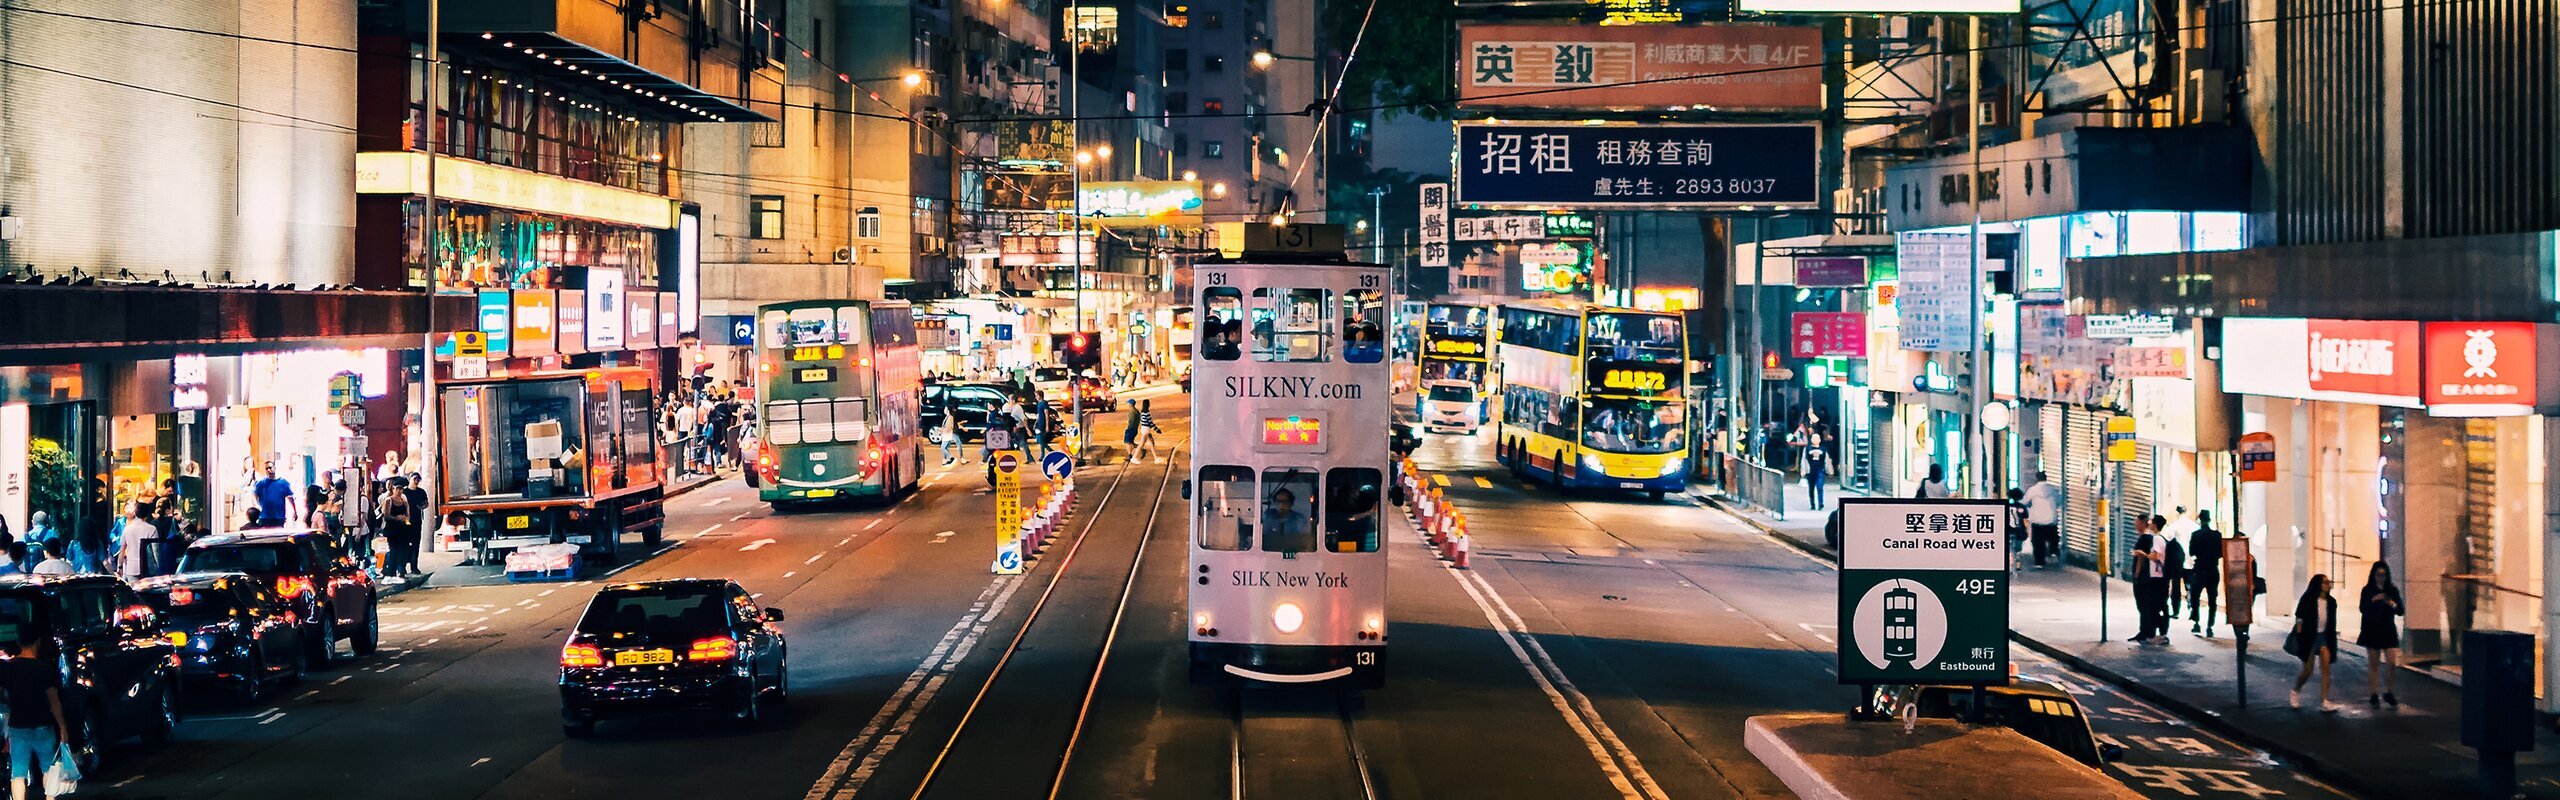 Hong Kong Travel Guide: All Things You Want to Know